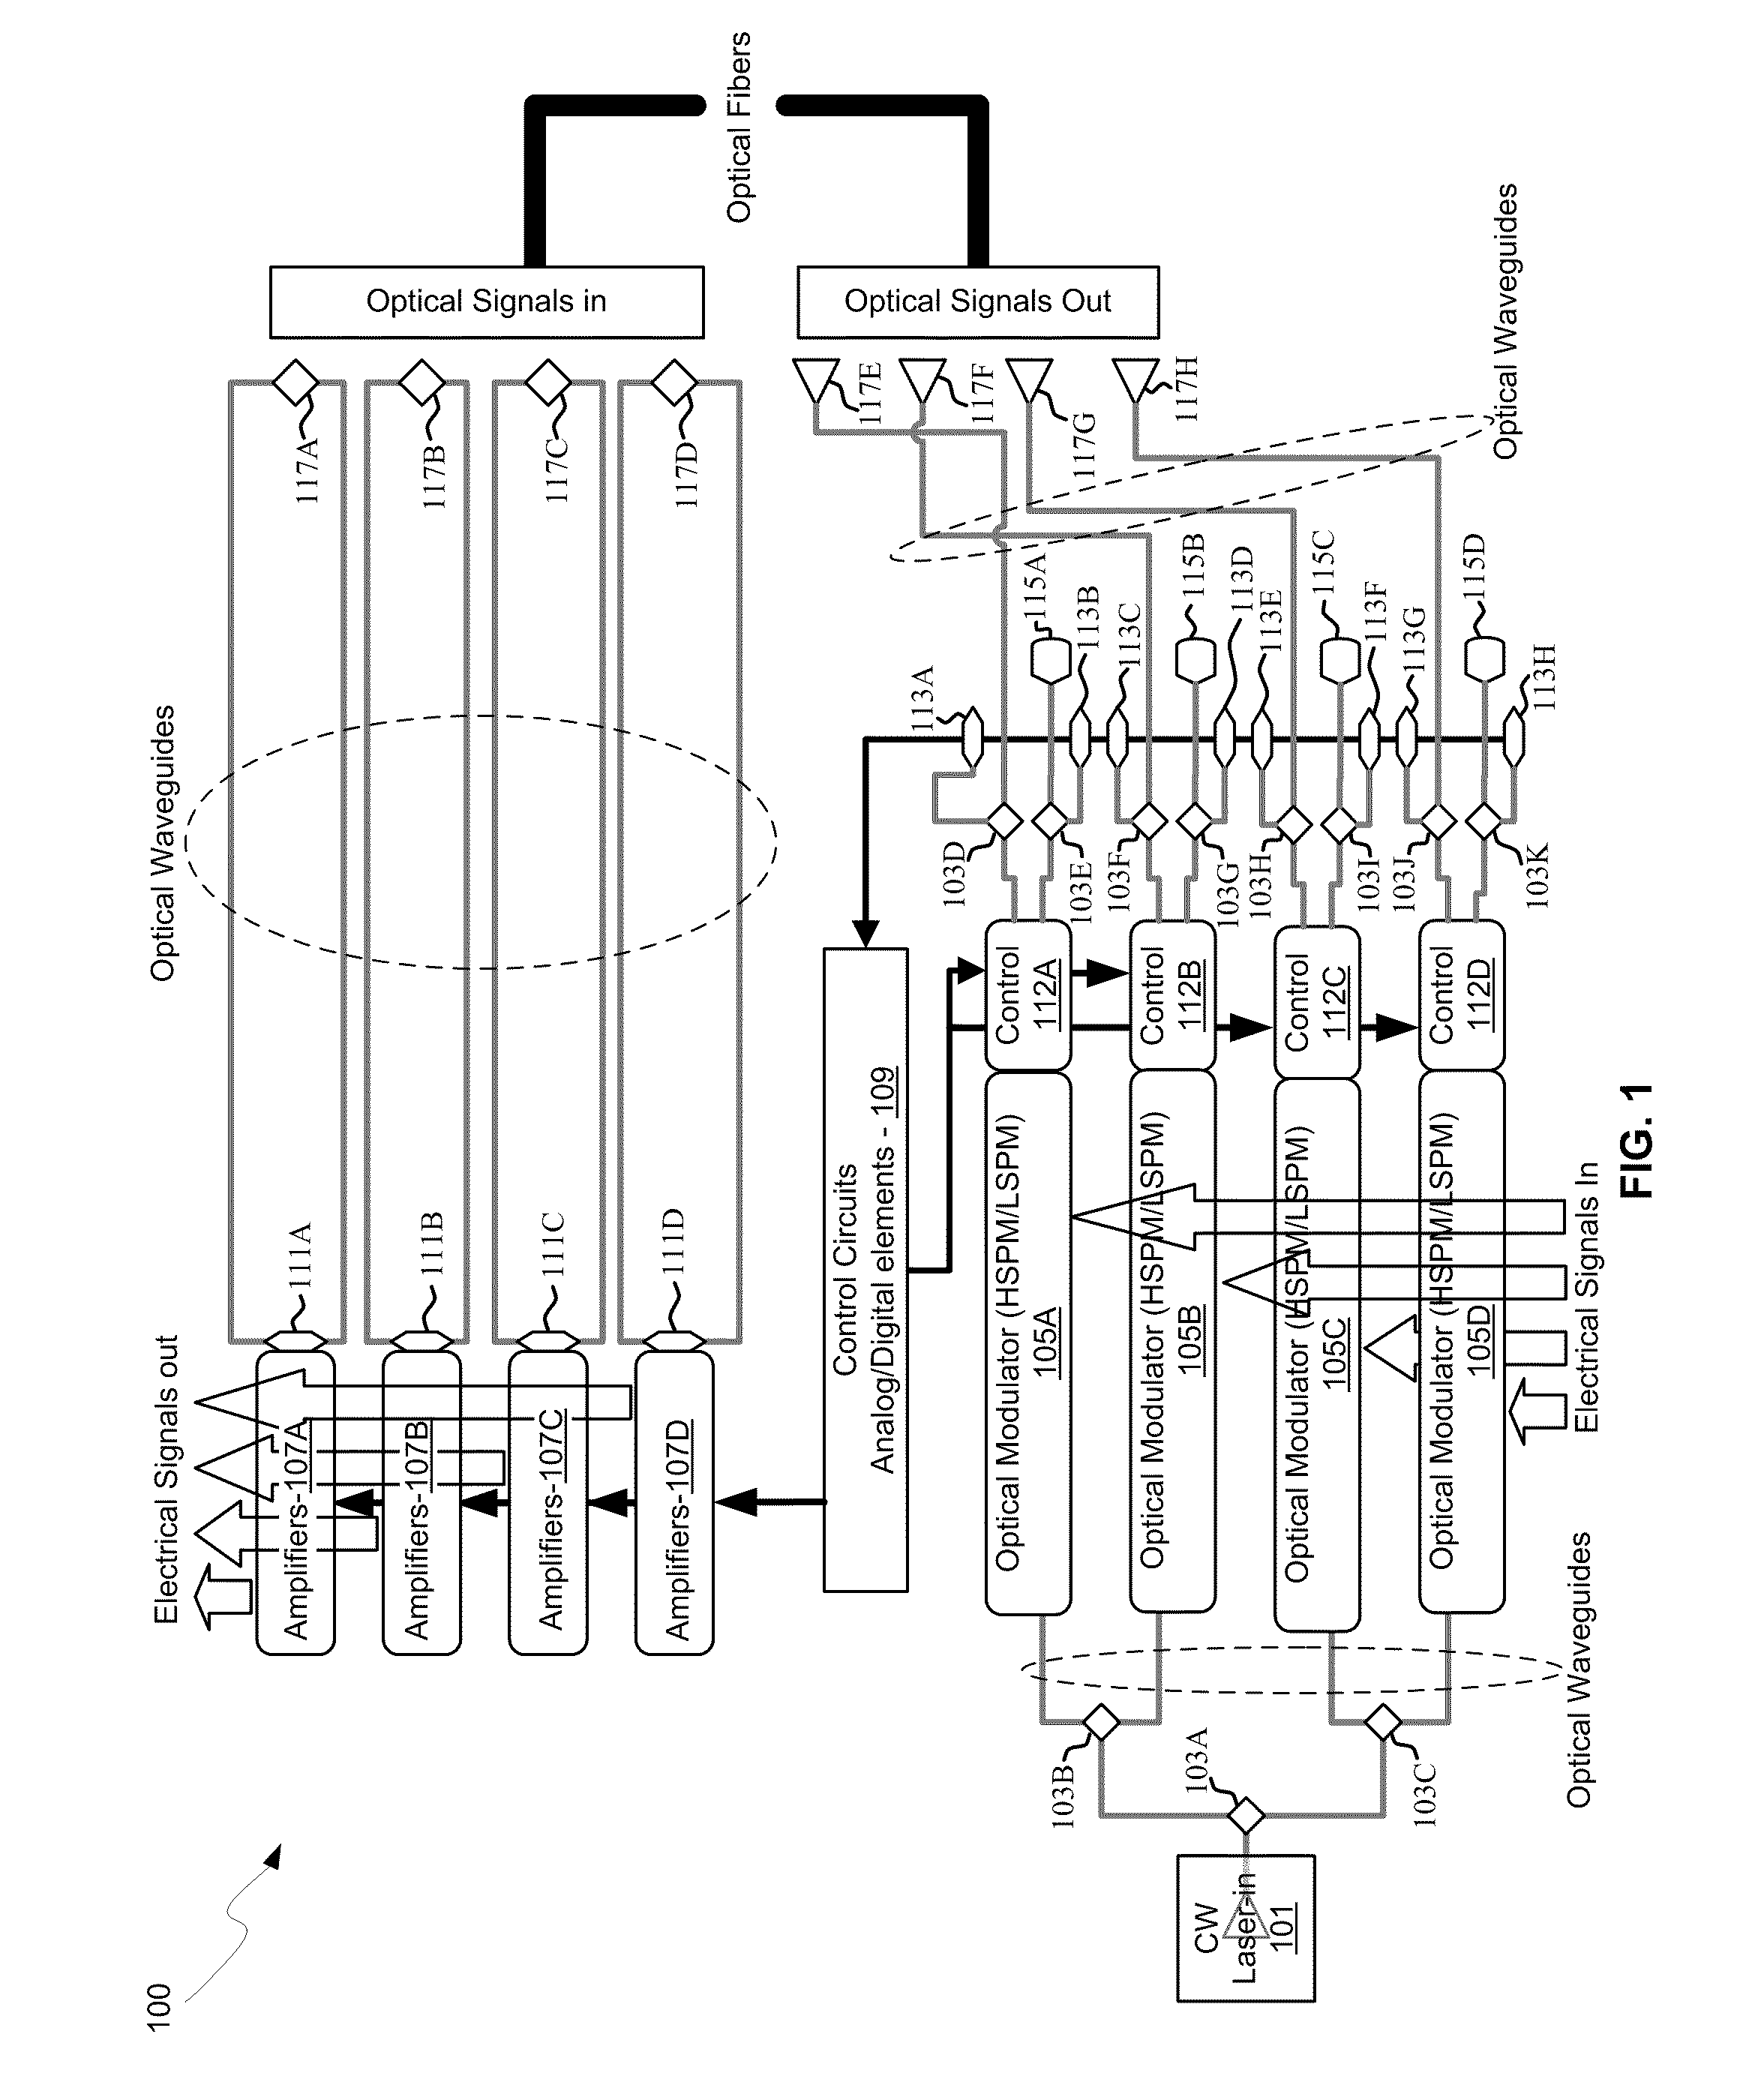 Method and System for Implementing High-Speed Interfaces Between Semiconductor Dies in Optical Communication Systems